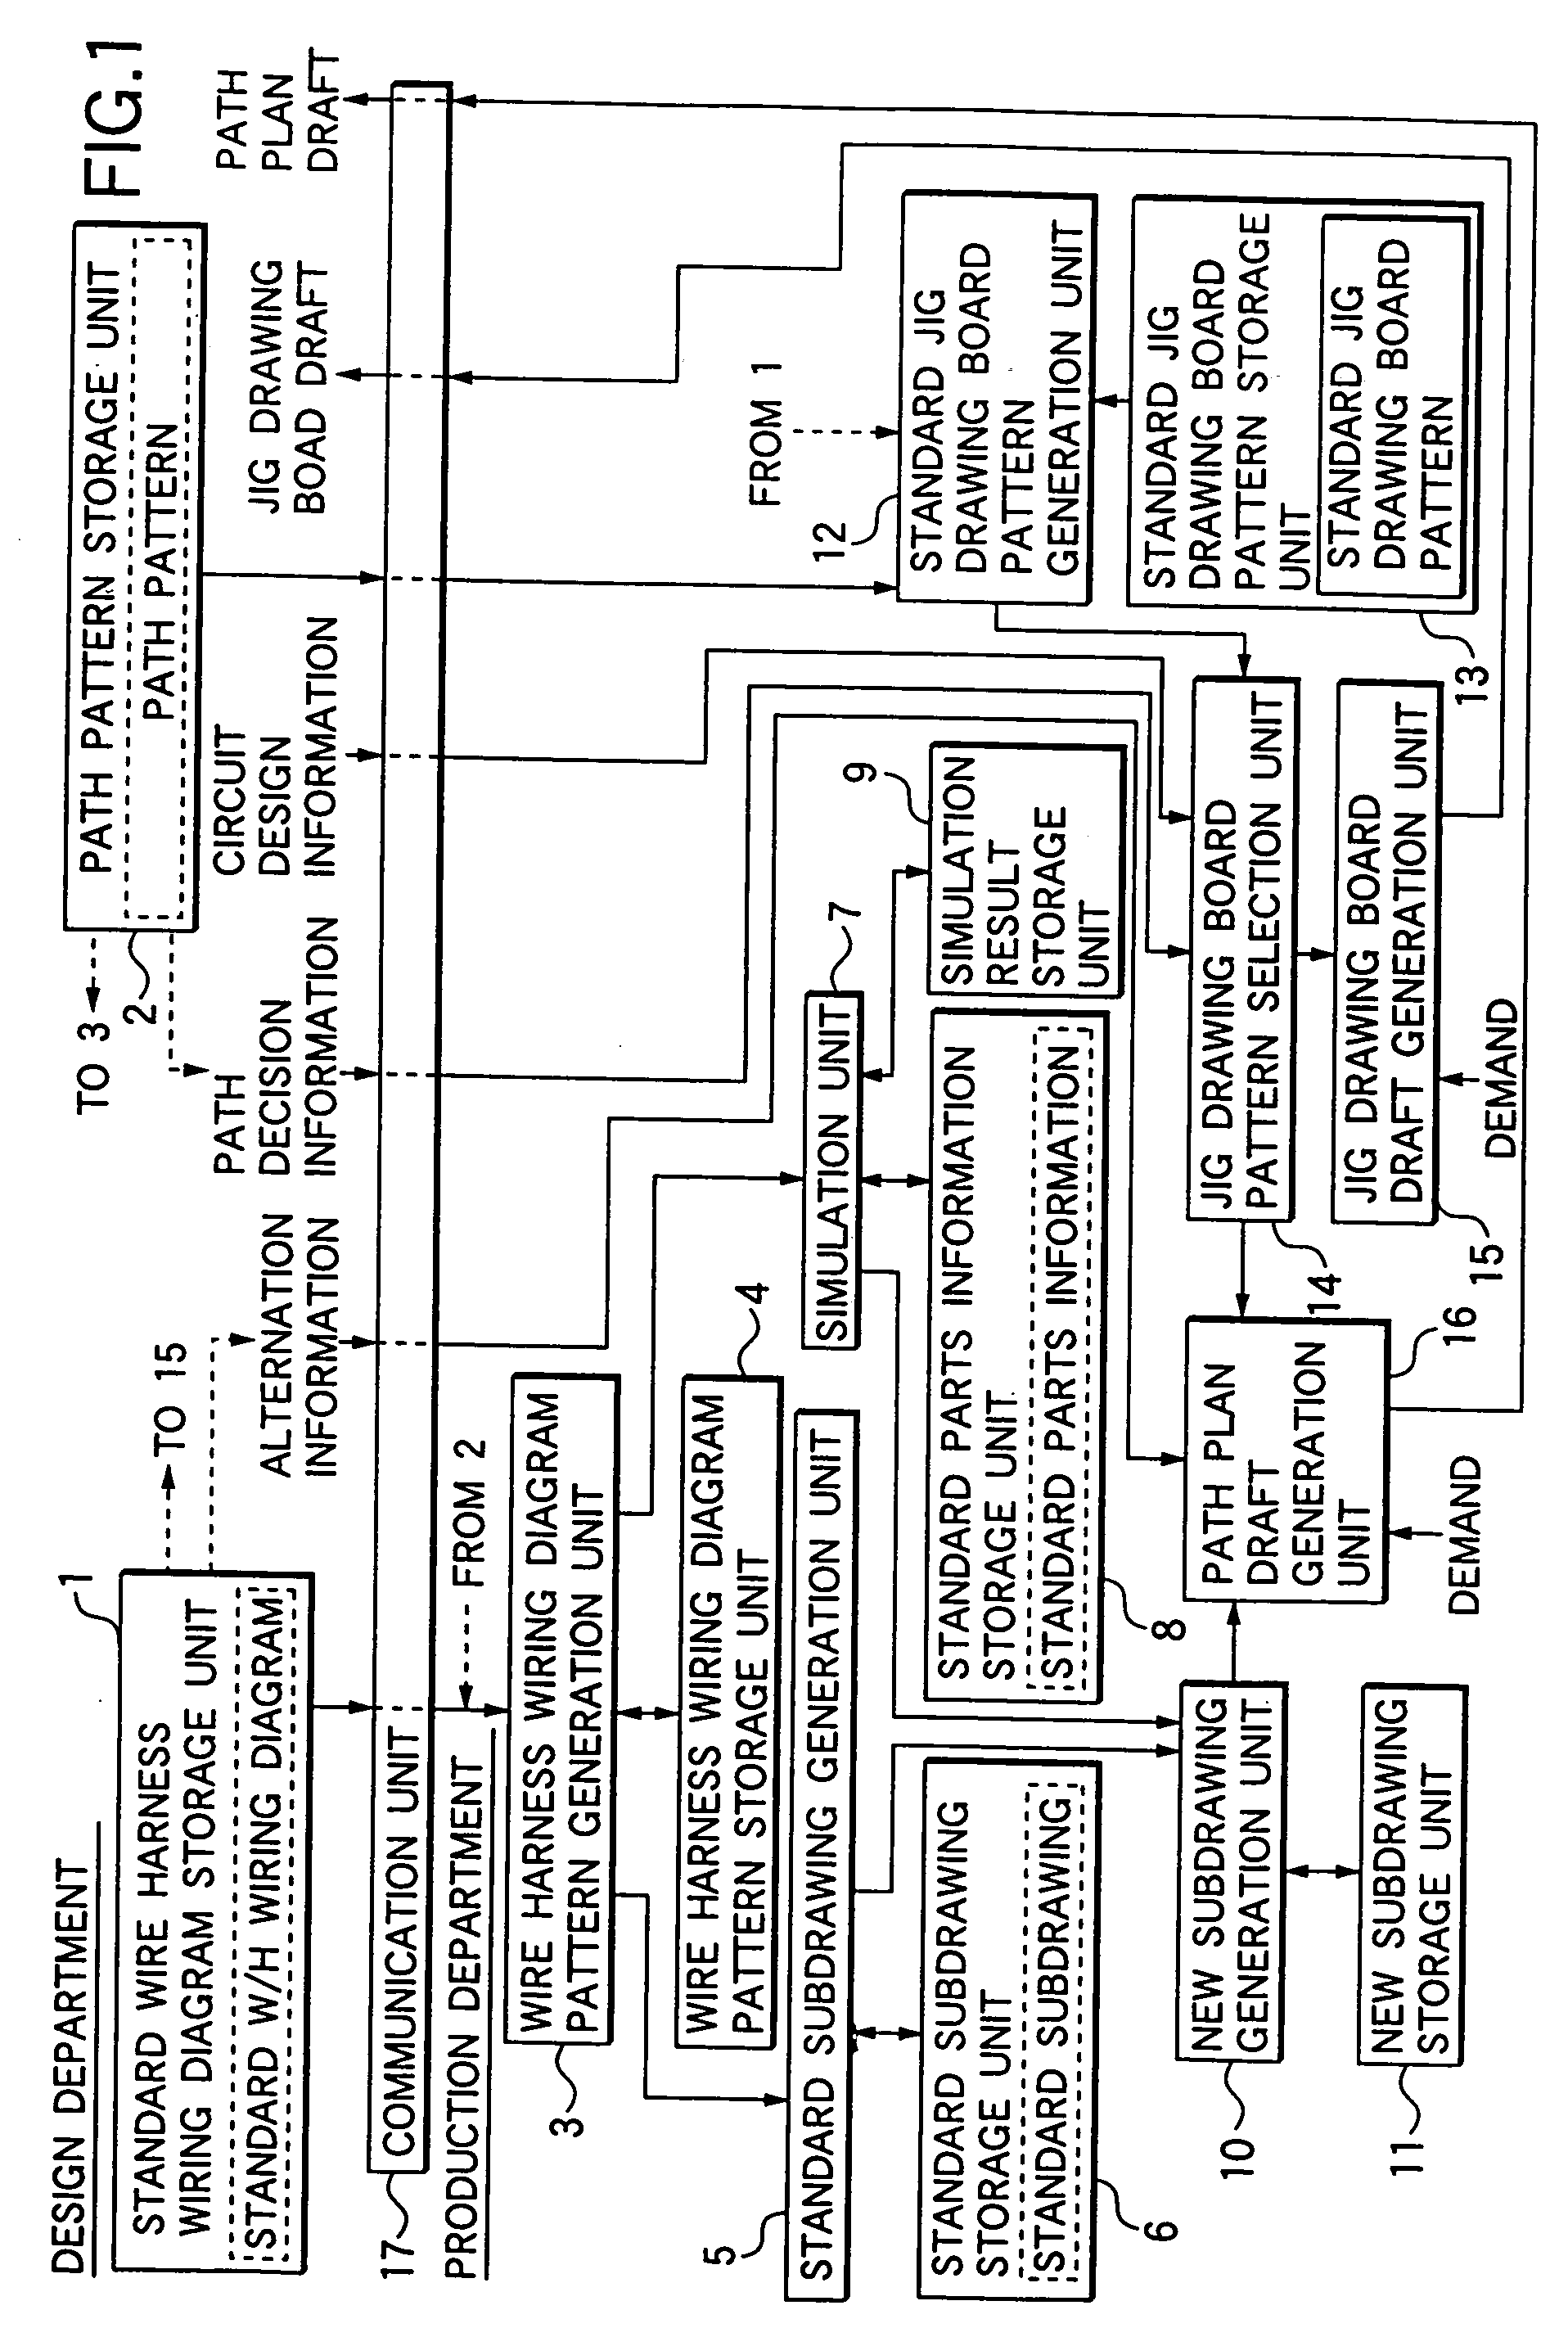 System for preparing wire harness production